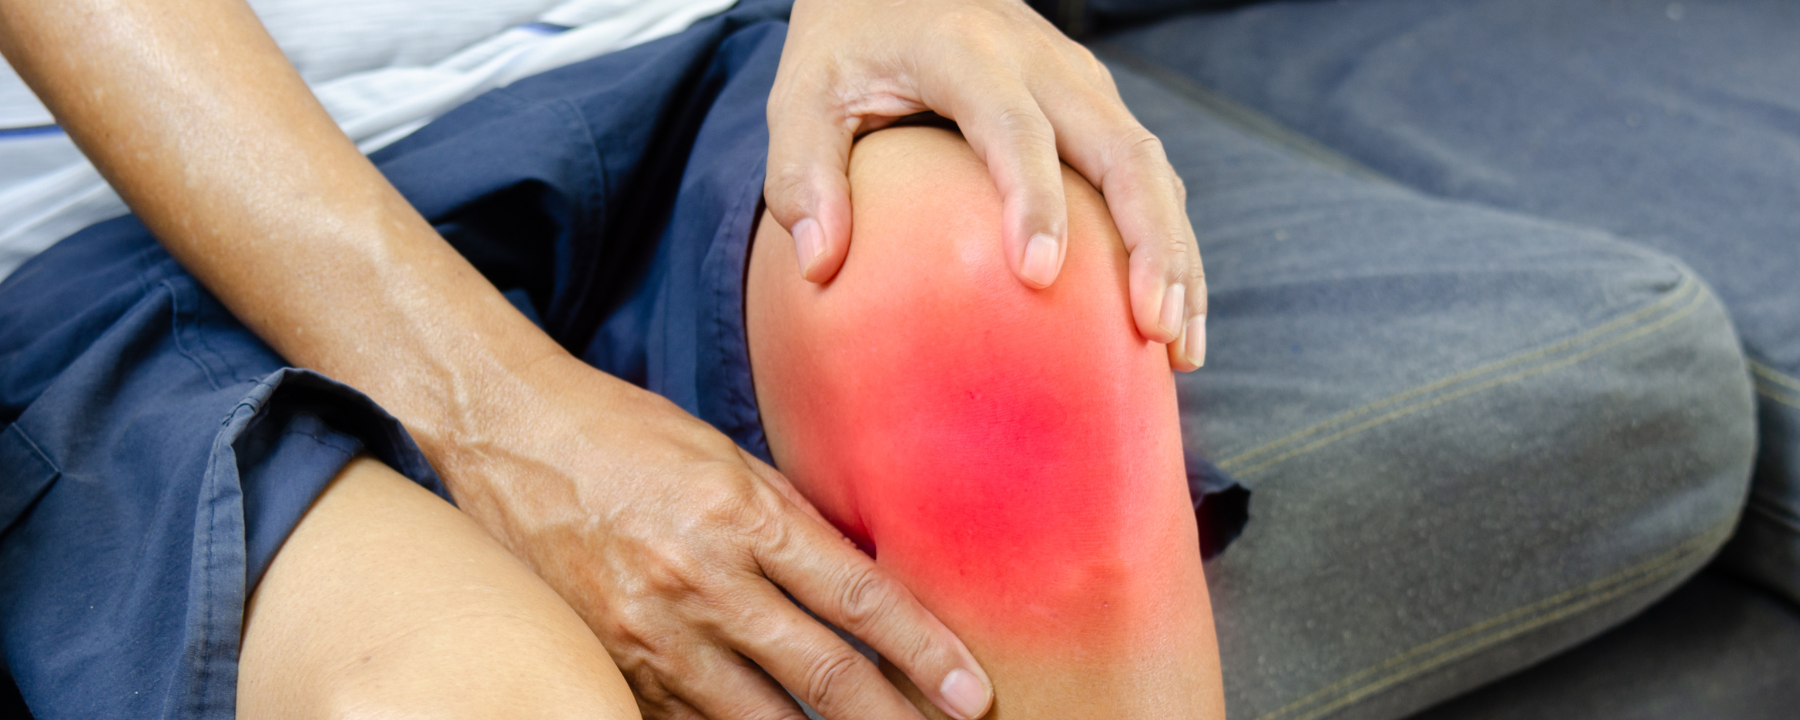 how to get rid of knee pain fast